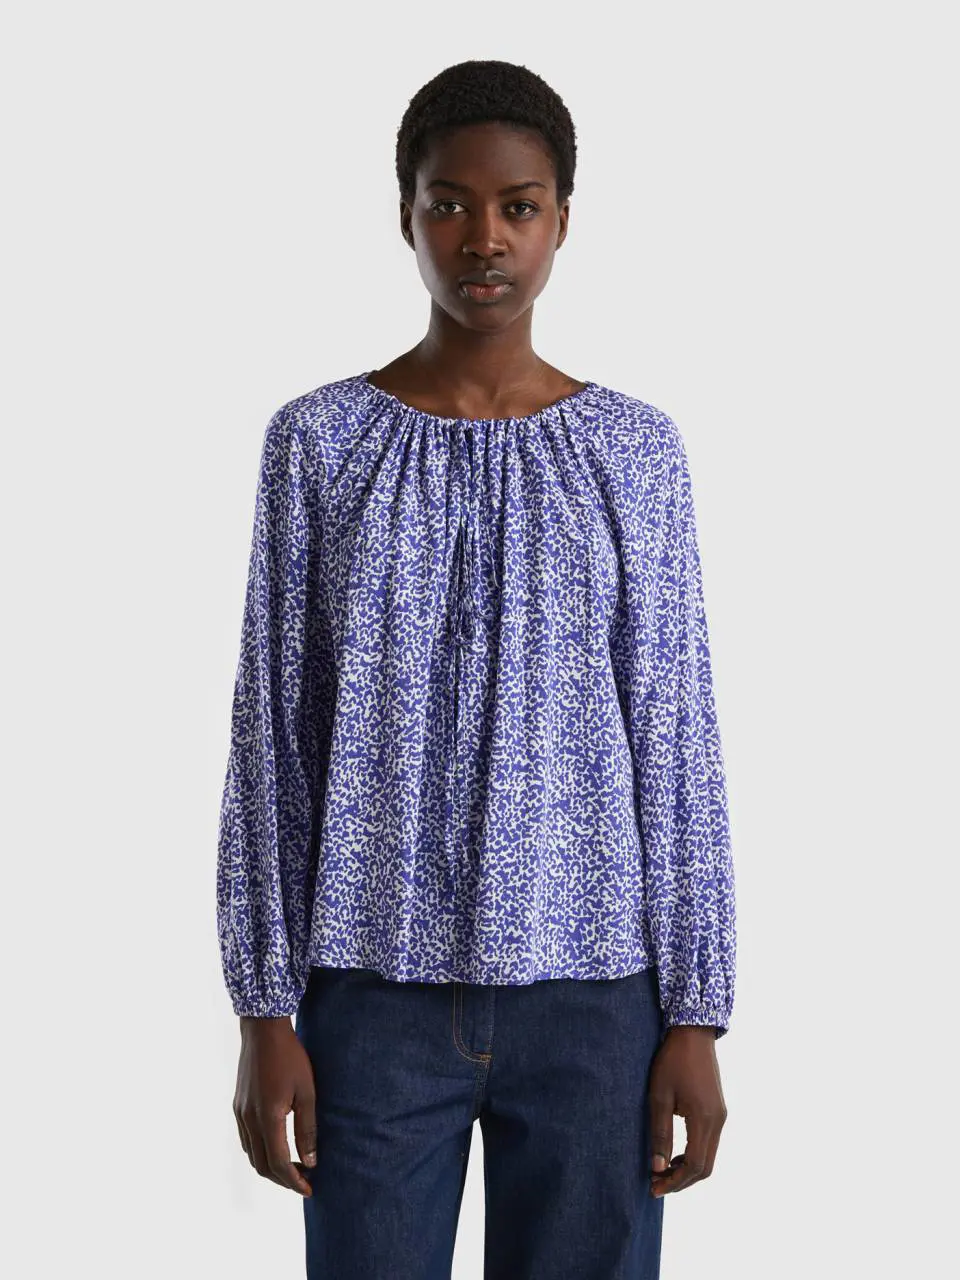 Benetton patterned blouse with laces. 1